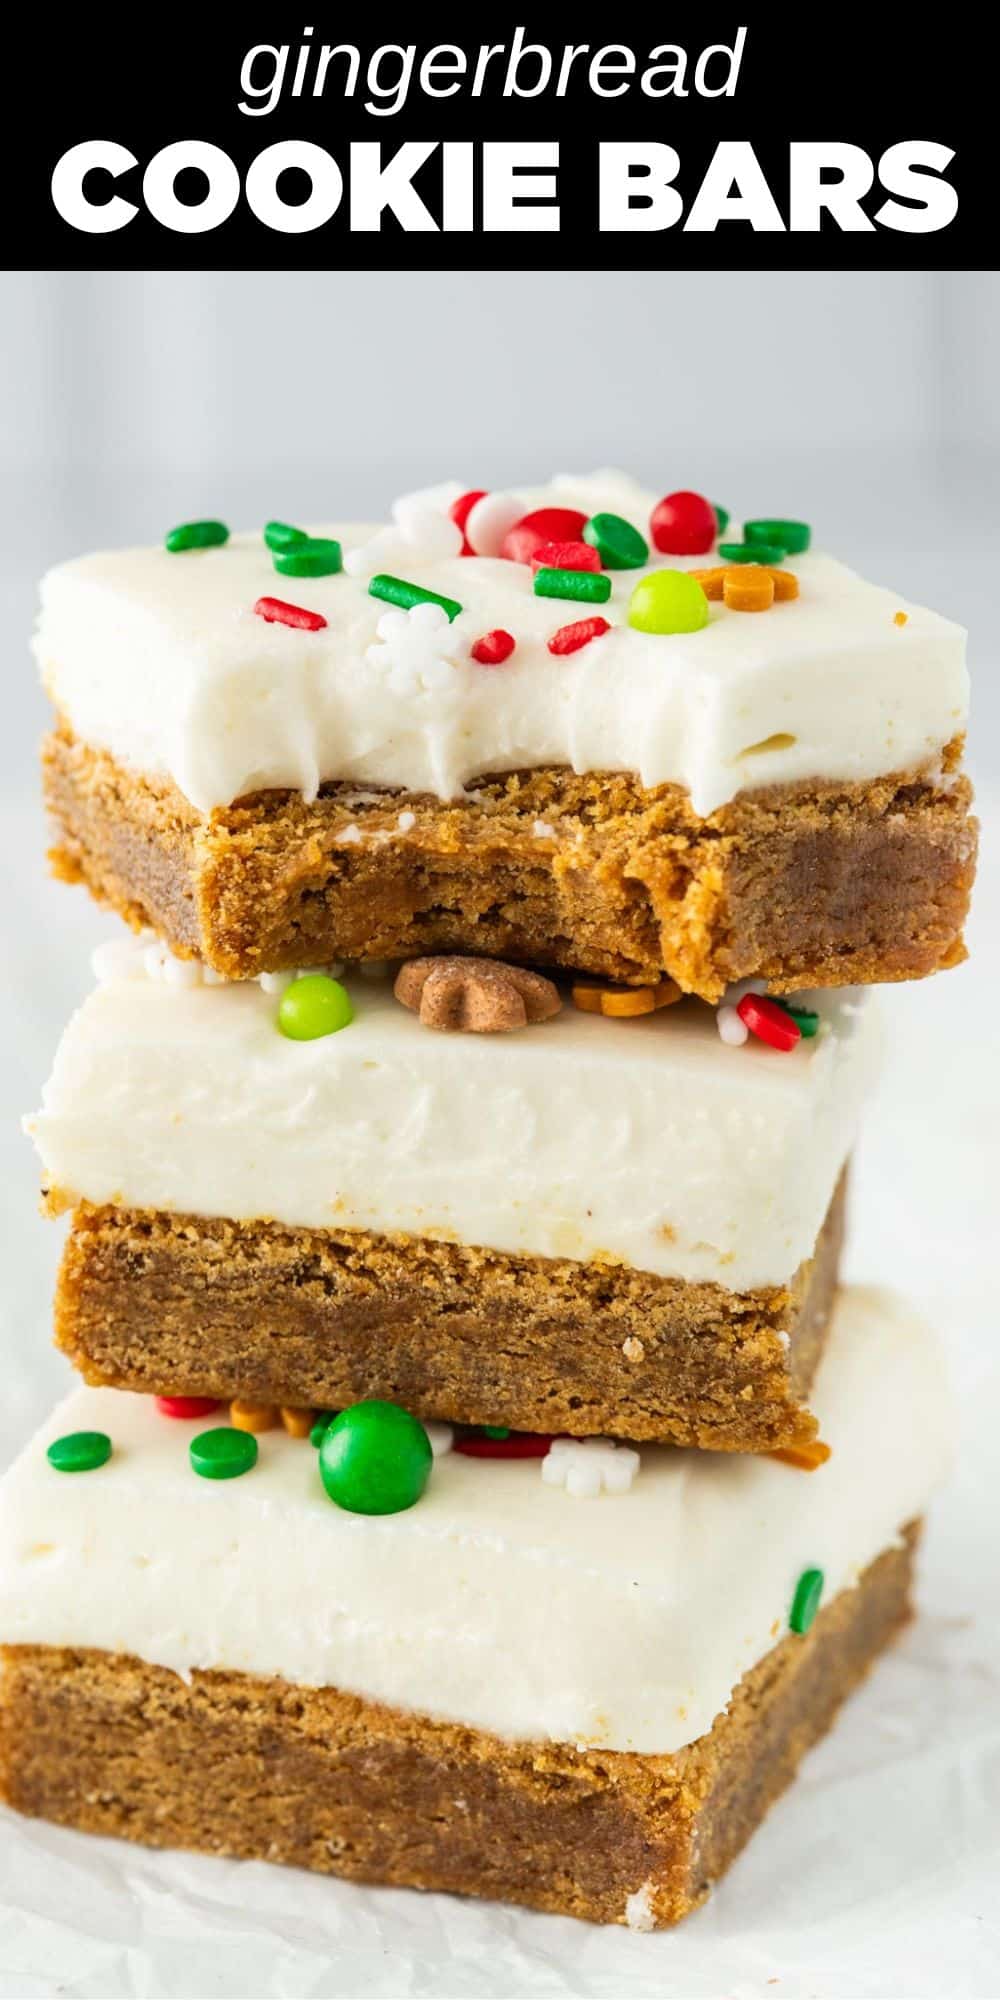 Savor the season with our easy gingerbread cookie bars! A festive blend of molasses and spices in every bite. Elevate your holiday baking effortlessly.